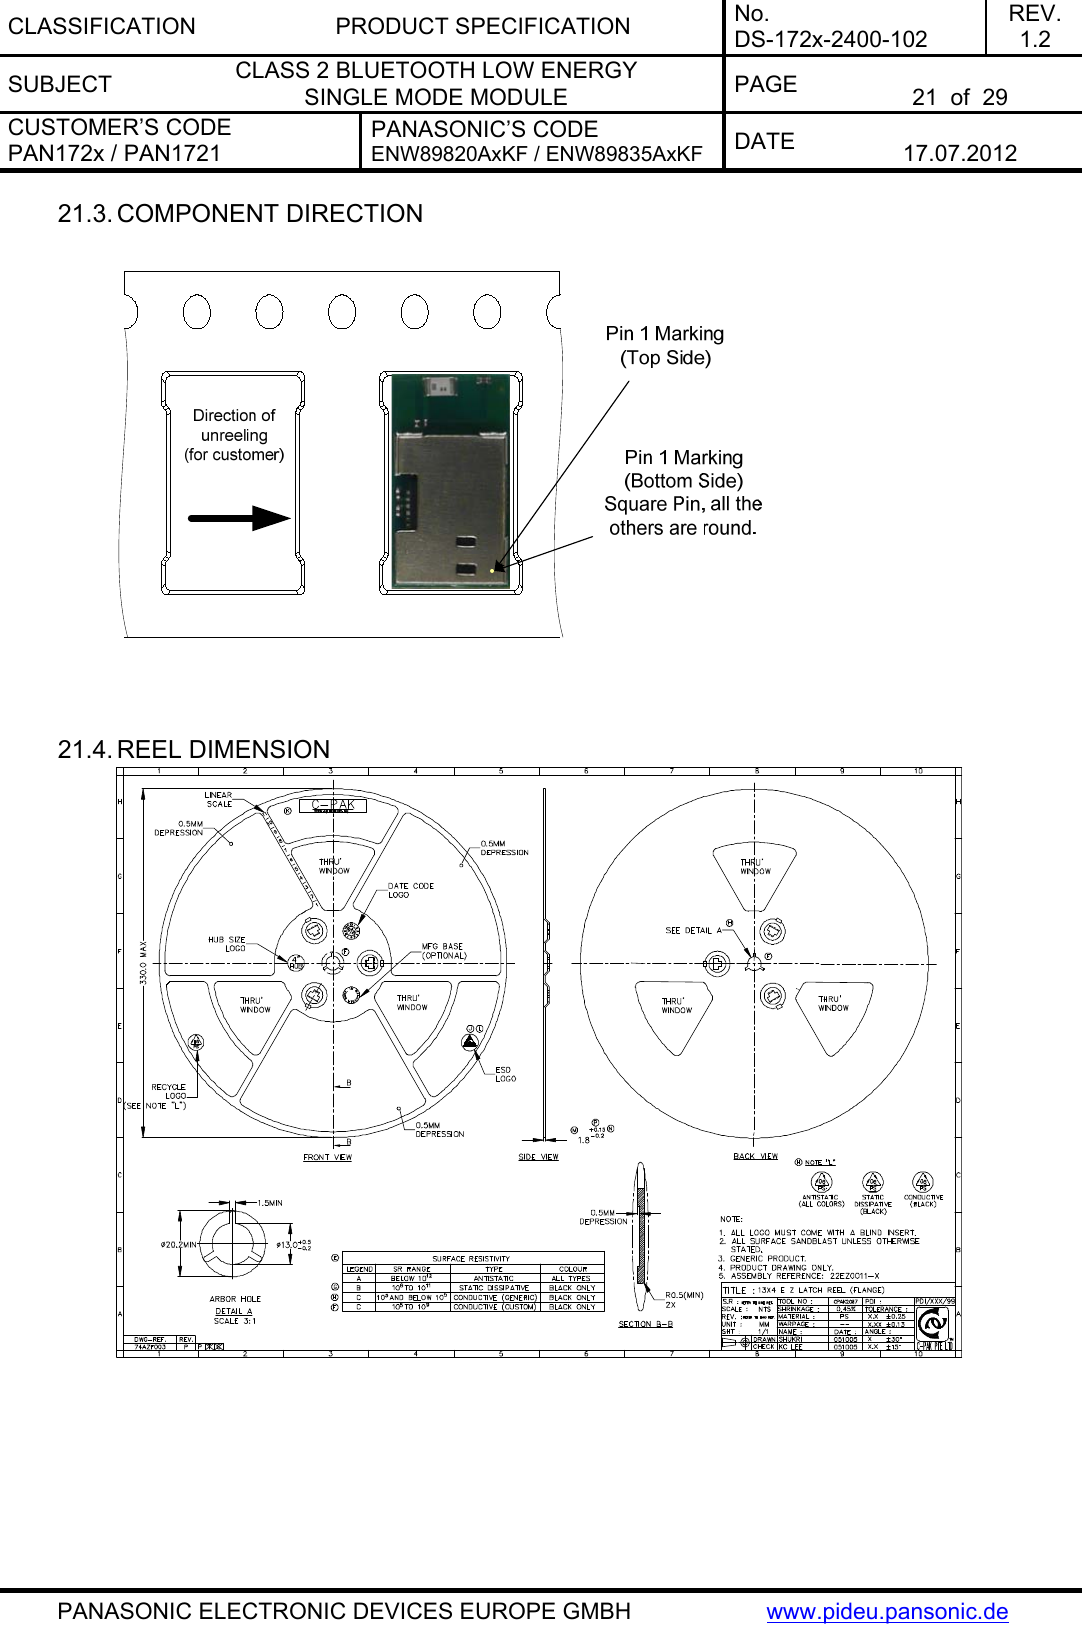 CLASSIFICATION PRODUCT SPECIFICATION No. DS-172x-2400-102 REV. 1.2 SUBJECT  CLASS 2 BLUETOOTH LOW ENERGY  SINGLE MODE MODULE  PAGE   21  of  29 CUSTOMER’S CODE PAN172x / PAN1721 PANASONIC’S CODE ENW89820AxKF / ENW89835AxKF  DATE   17.07.2012   PANASONIC ELECTRONIC DEVICES EUROPE GMBH  www.pideu.pansonic.de 21.3. COMPONENT DIRECTION     21.4. REEL DIMENSION   